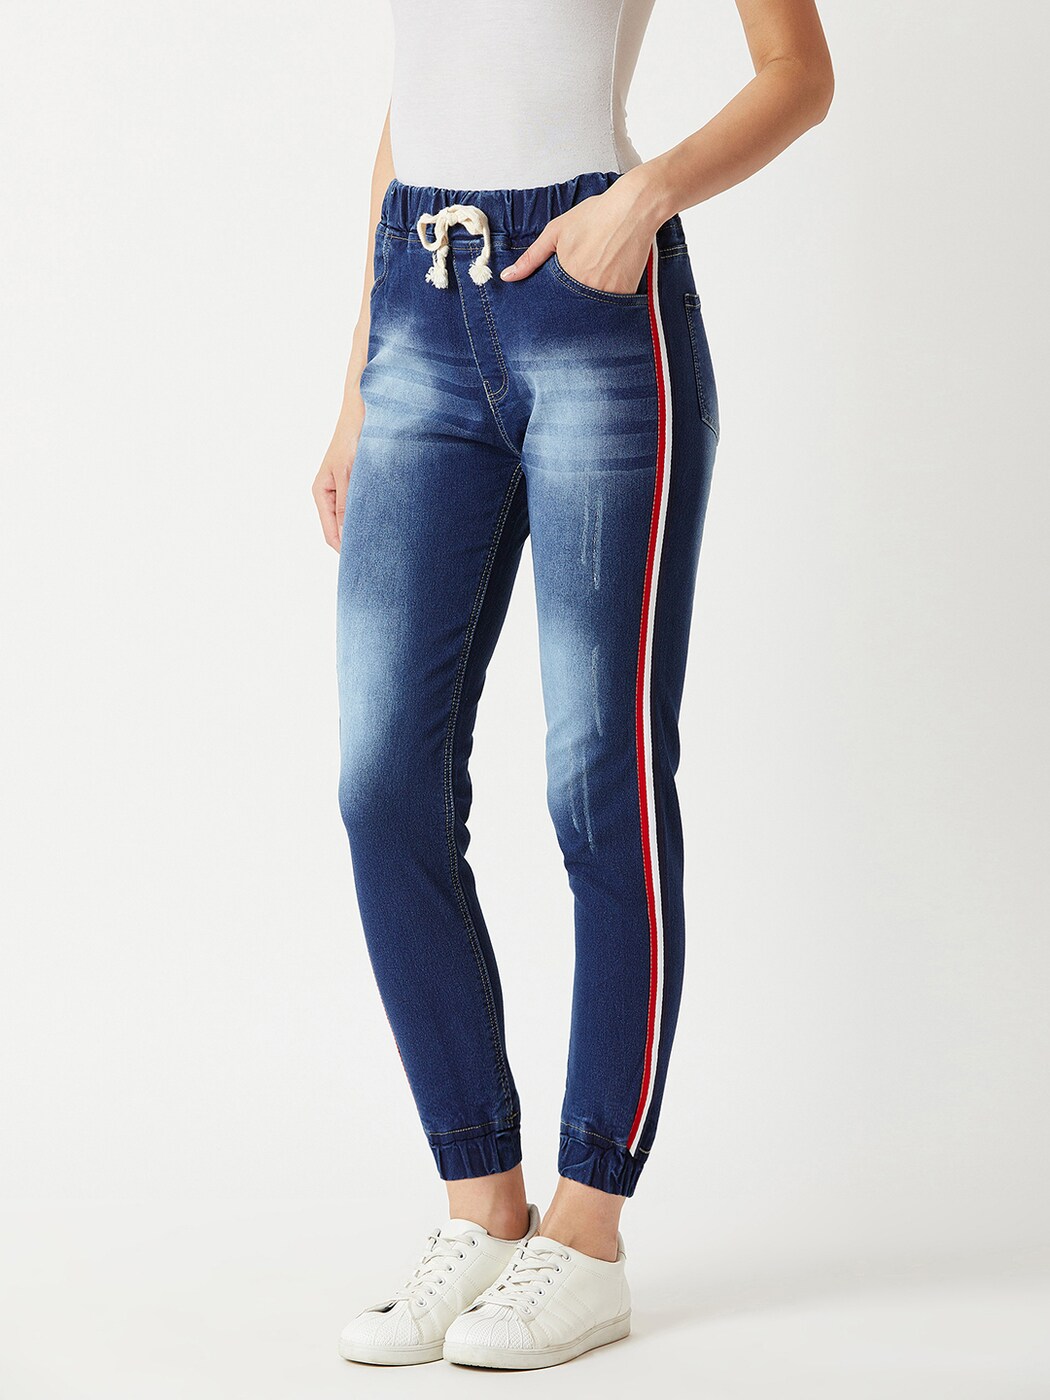 Buy NEXT ONE Slim Fit High Waist Trendy Strip Jeans Blue at Amazon.in